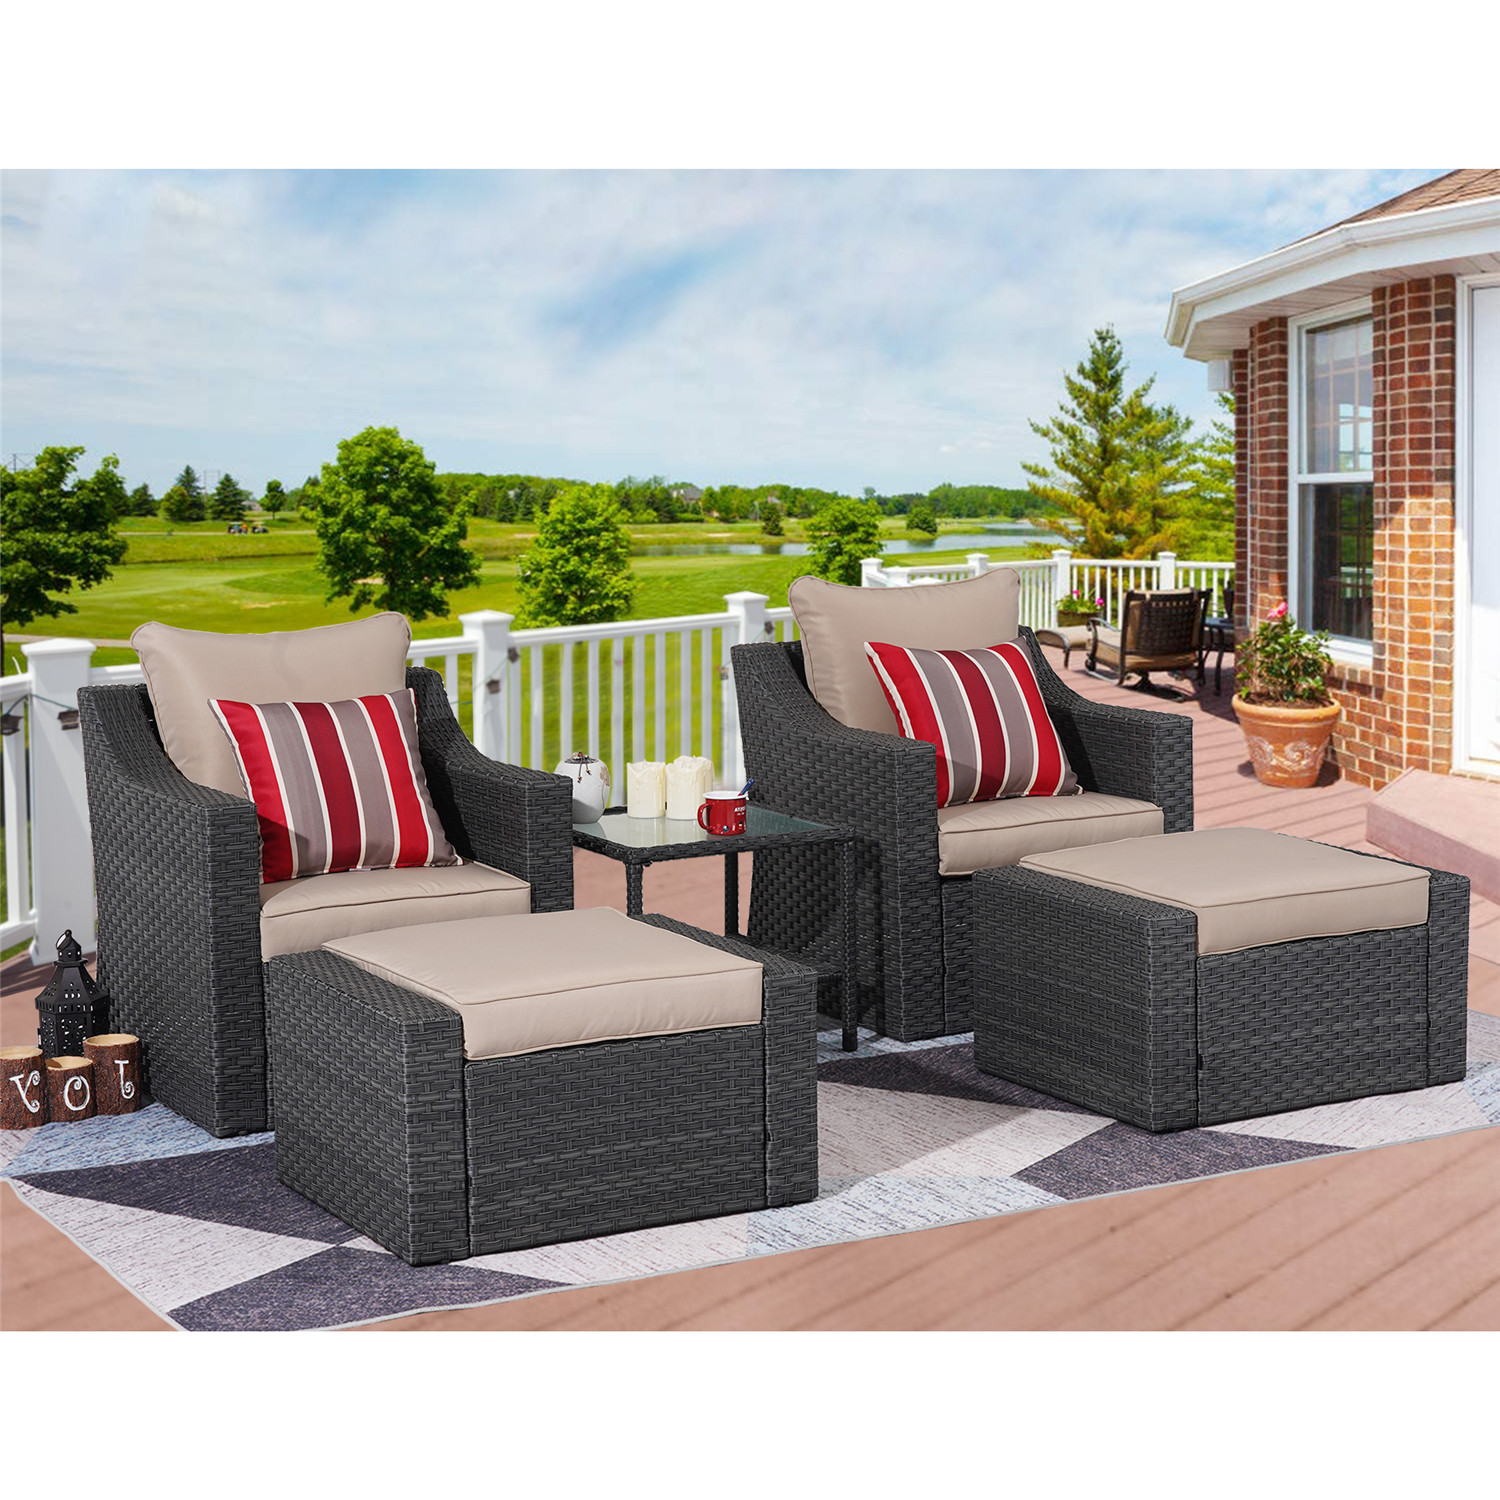 5 Pcs Outdoor Patio Furniture Set All Weather PE Rattan Wicker Cushioned Sectional Sofa Chairs with Ottomans and Side Table, Khaki - image 1 of 7